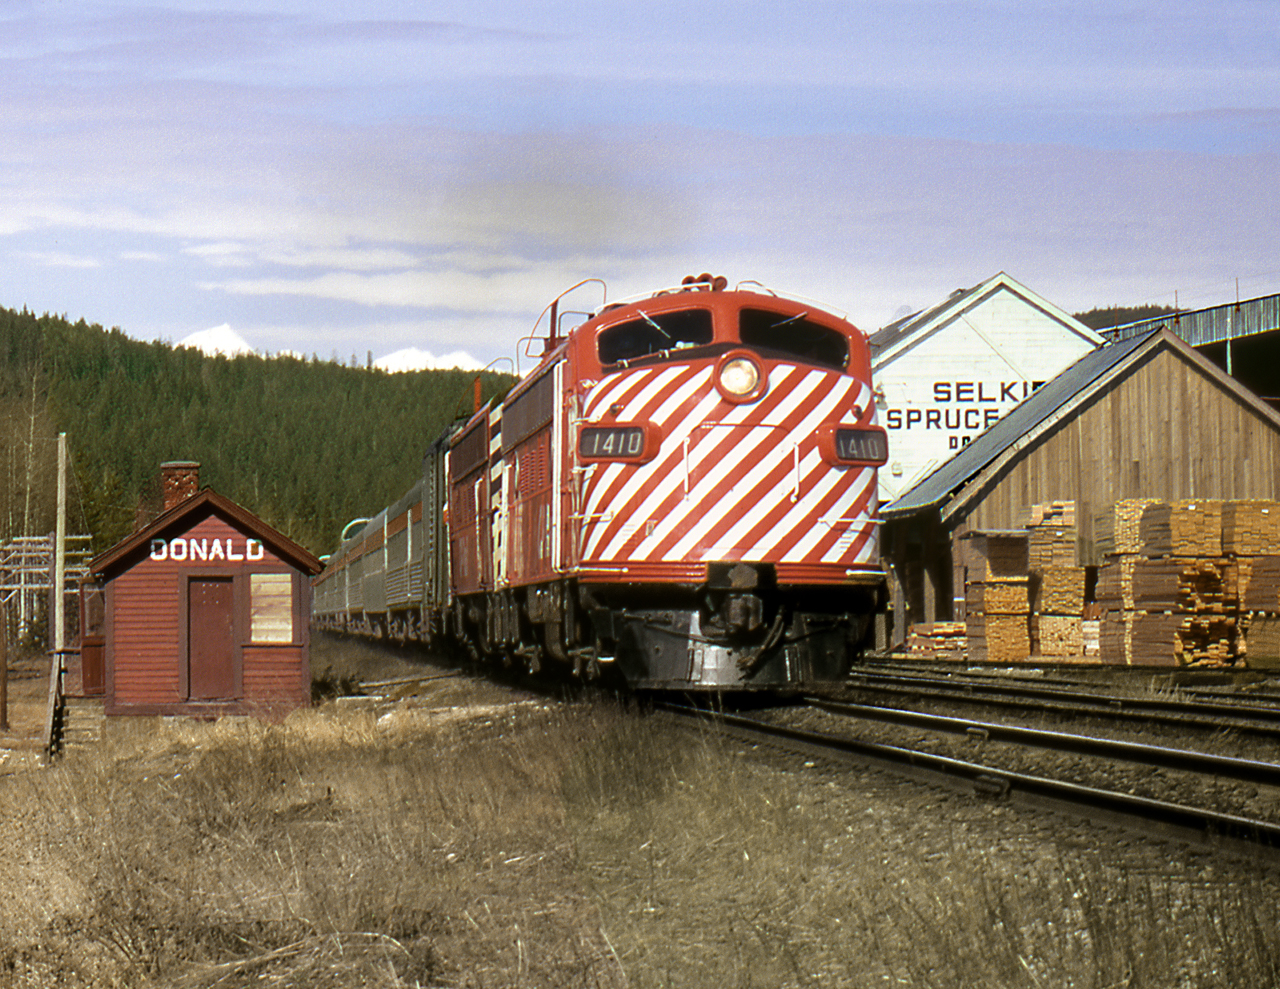 The eastbound "Canadian" passes the shelter station and sawmill at Donald BC just west of Golden